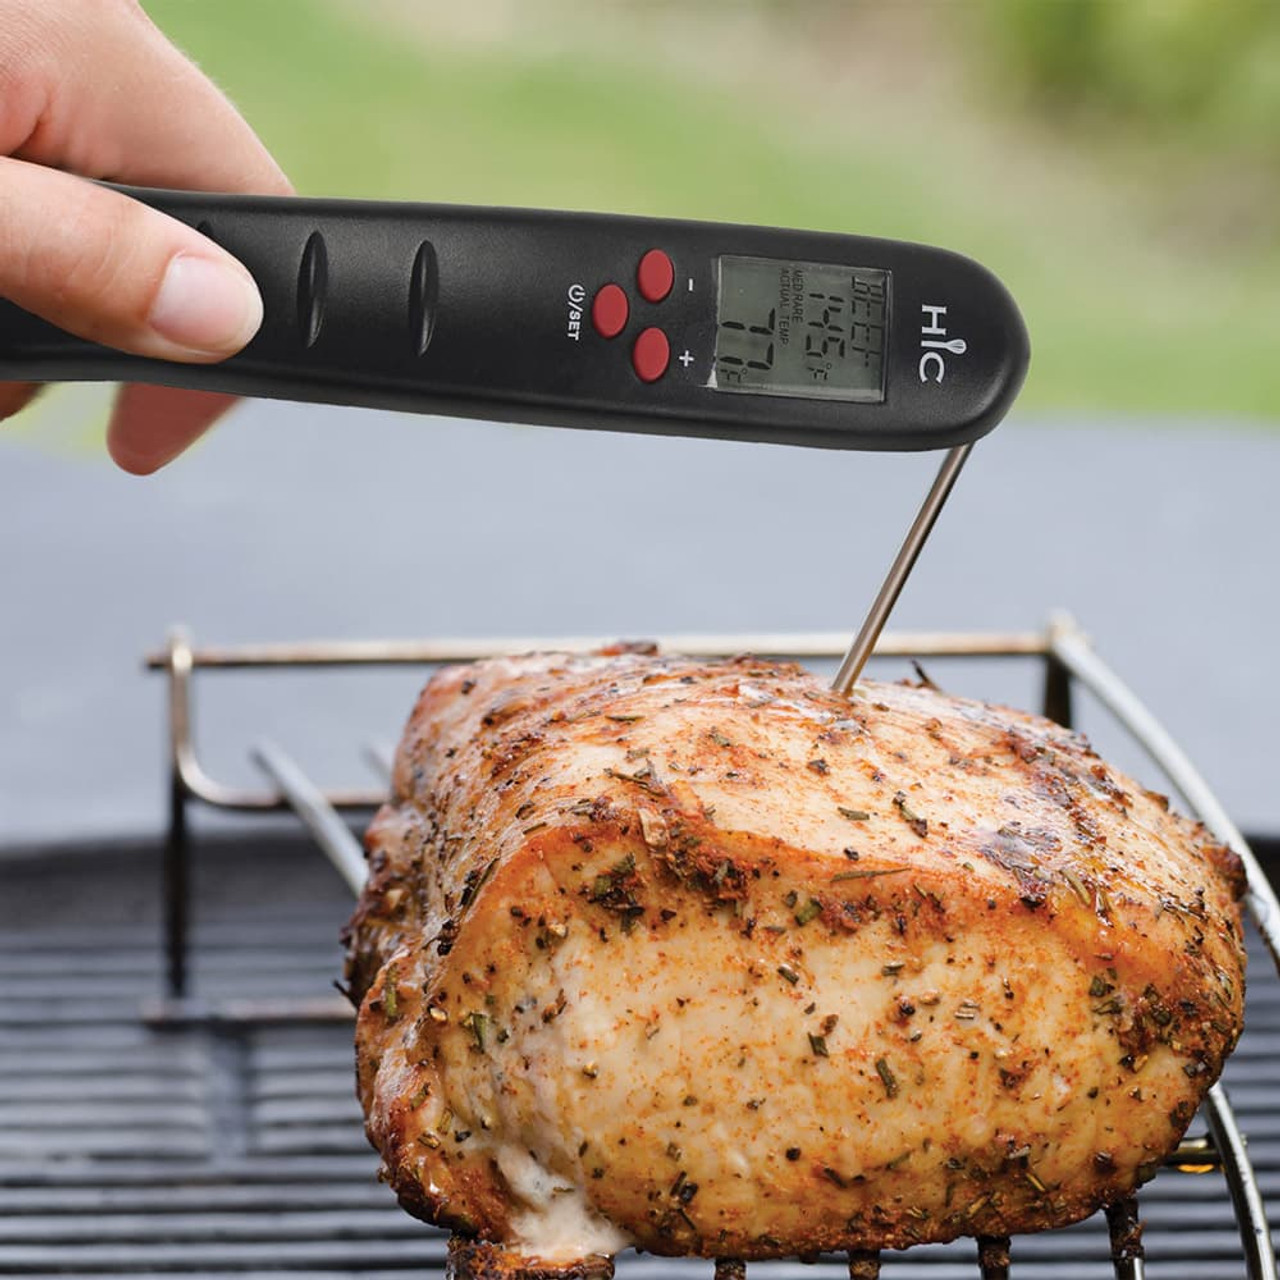  OXO Good Grips Chef's Digital Leave-In Thermometer, Stainless  Steel: Instant Read Thermometers: Home & Kitchen